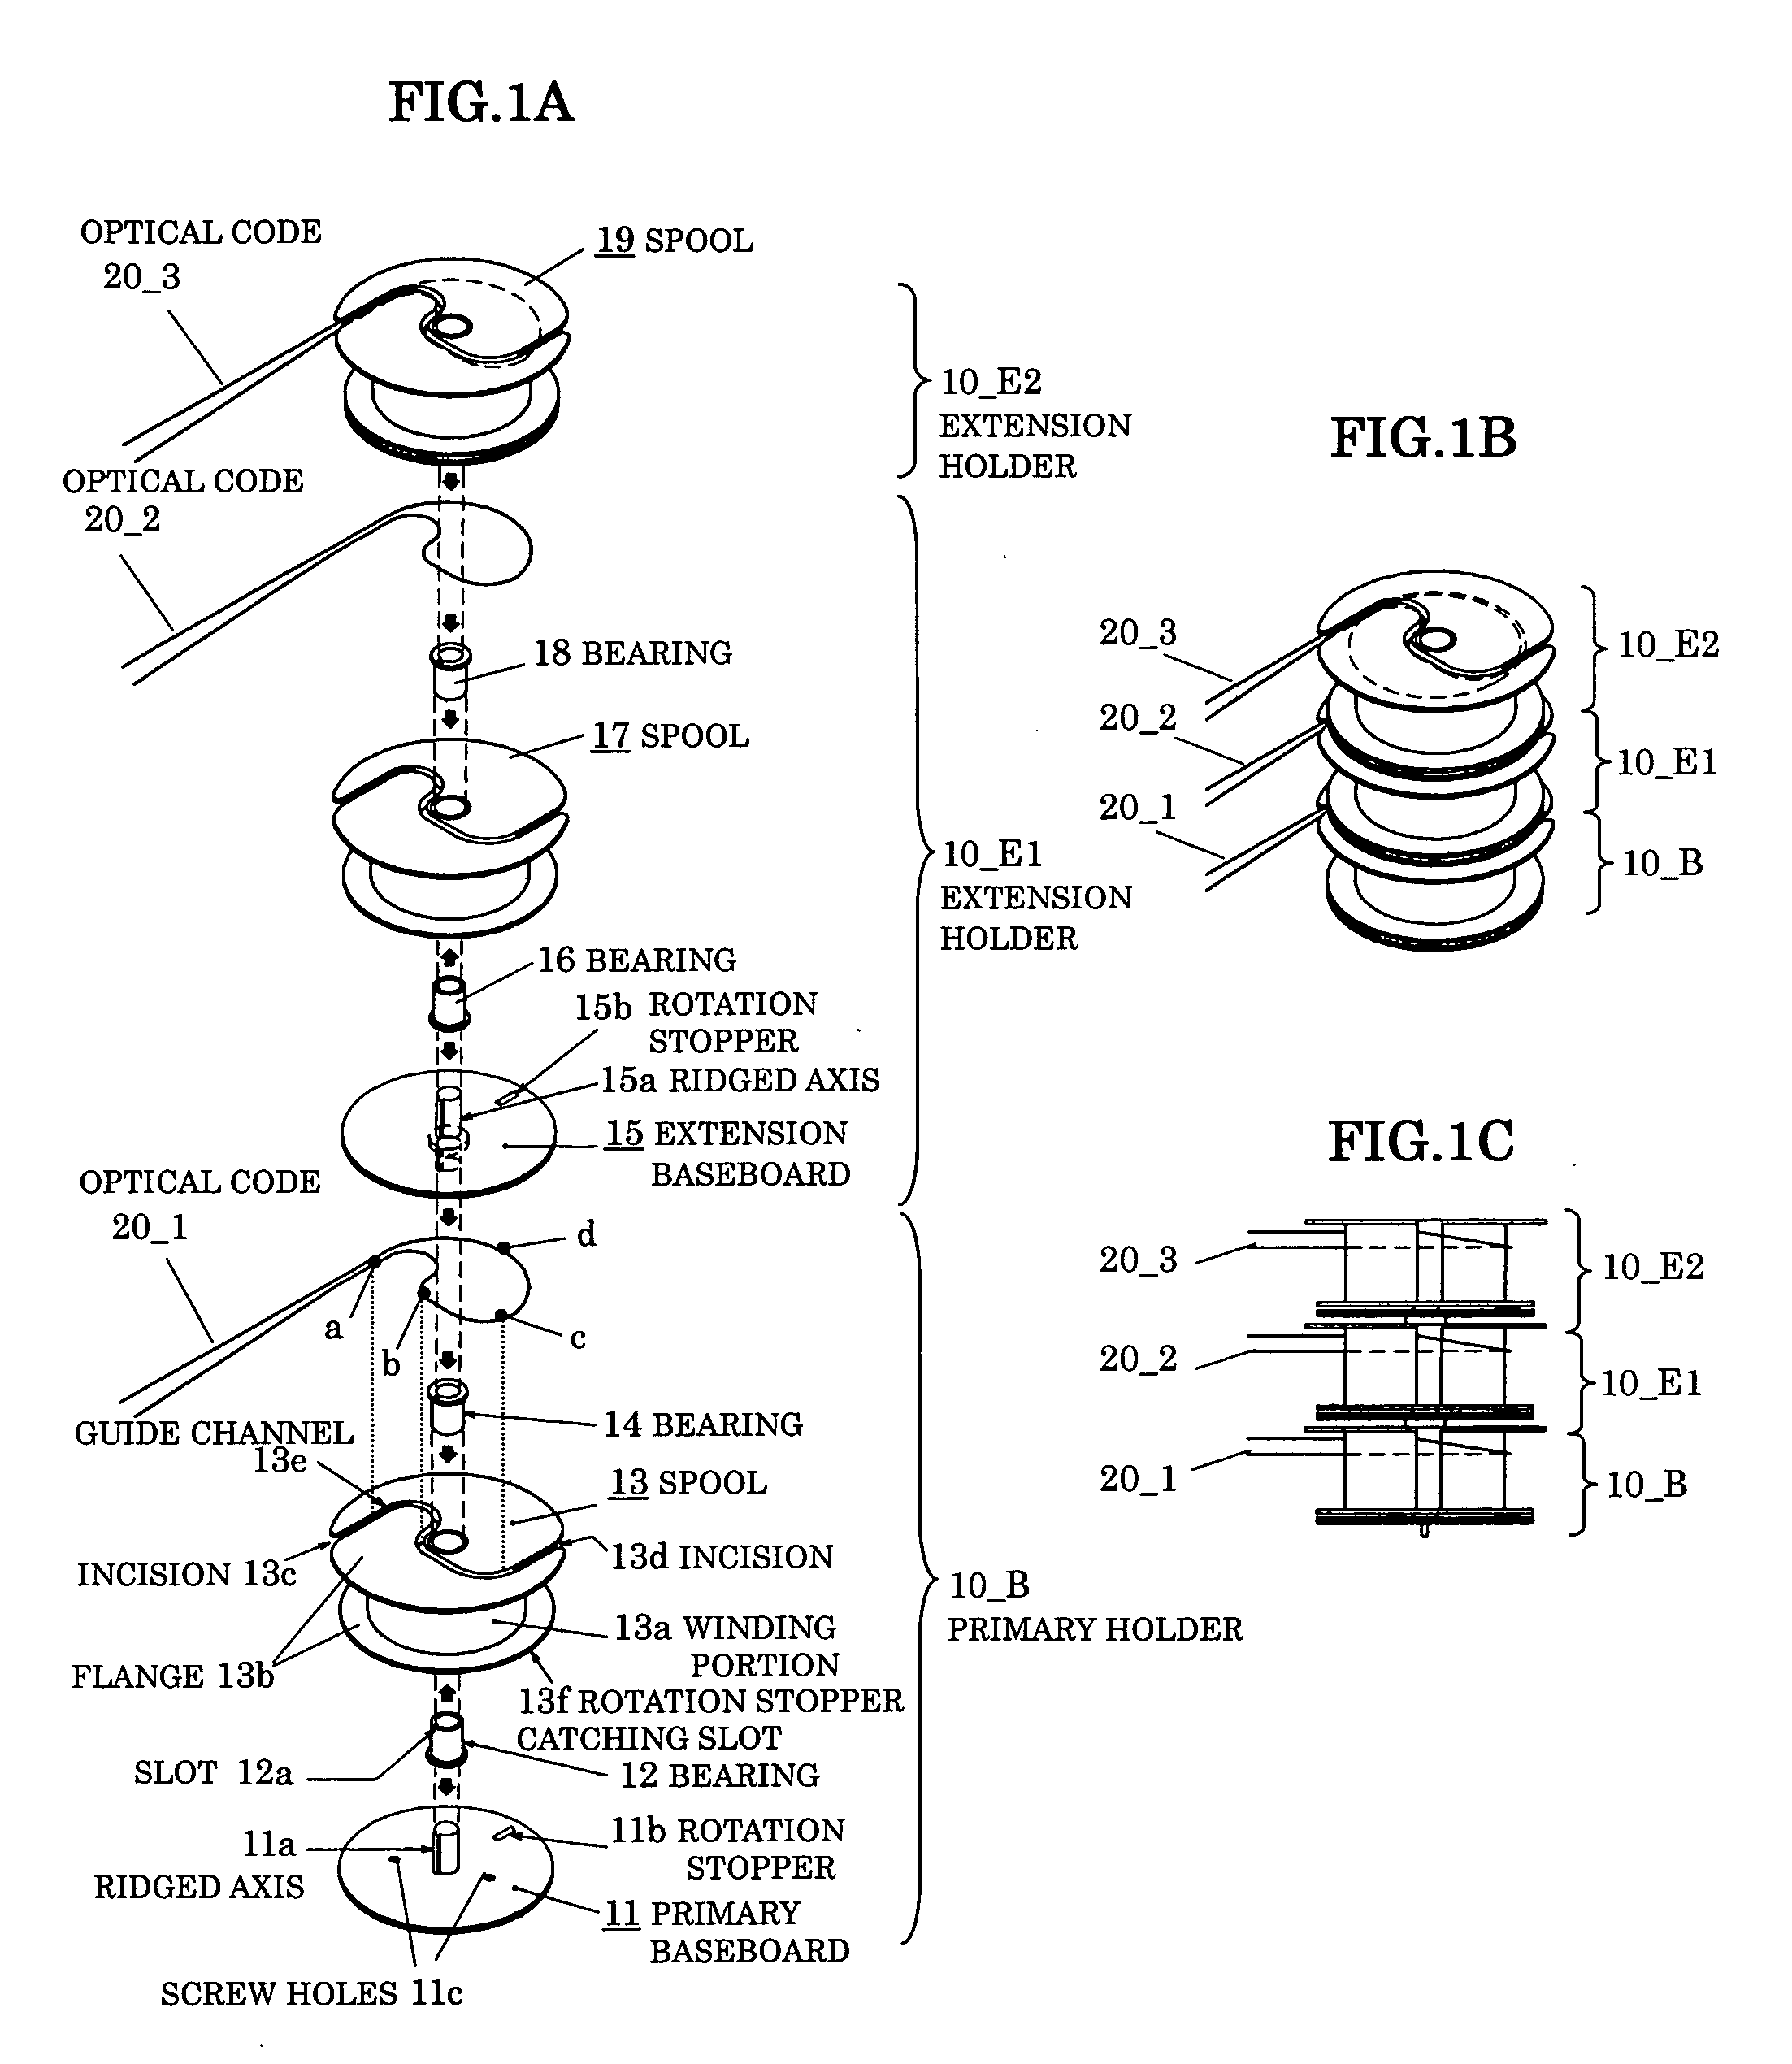 Holder and structure for organizing excess length